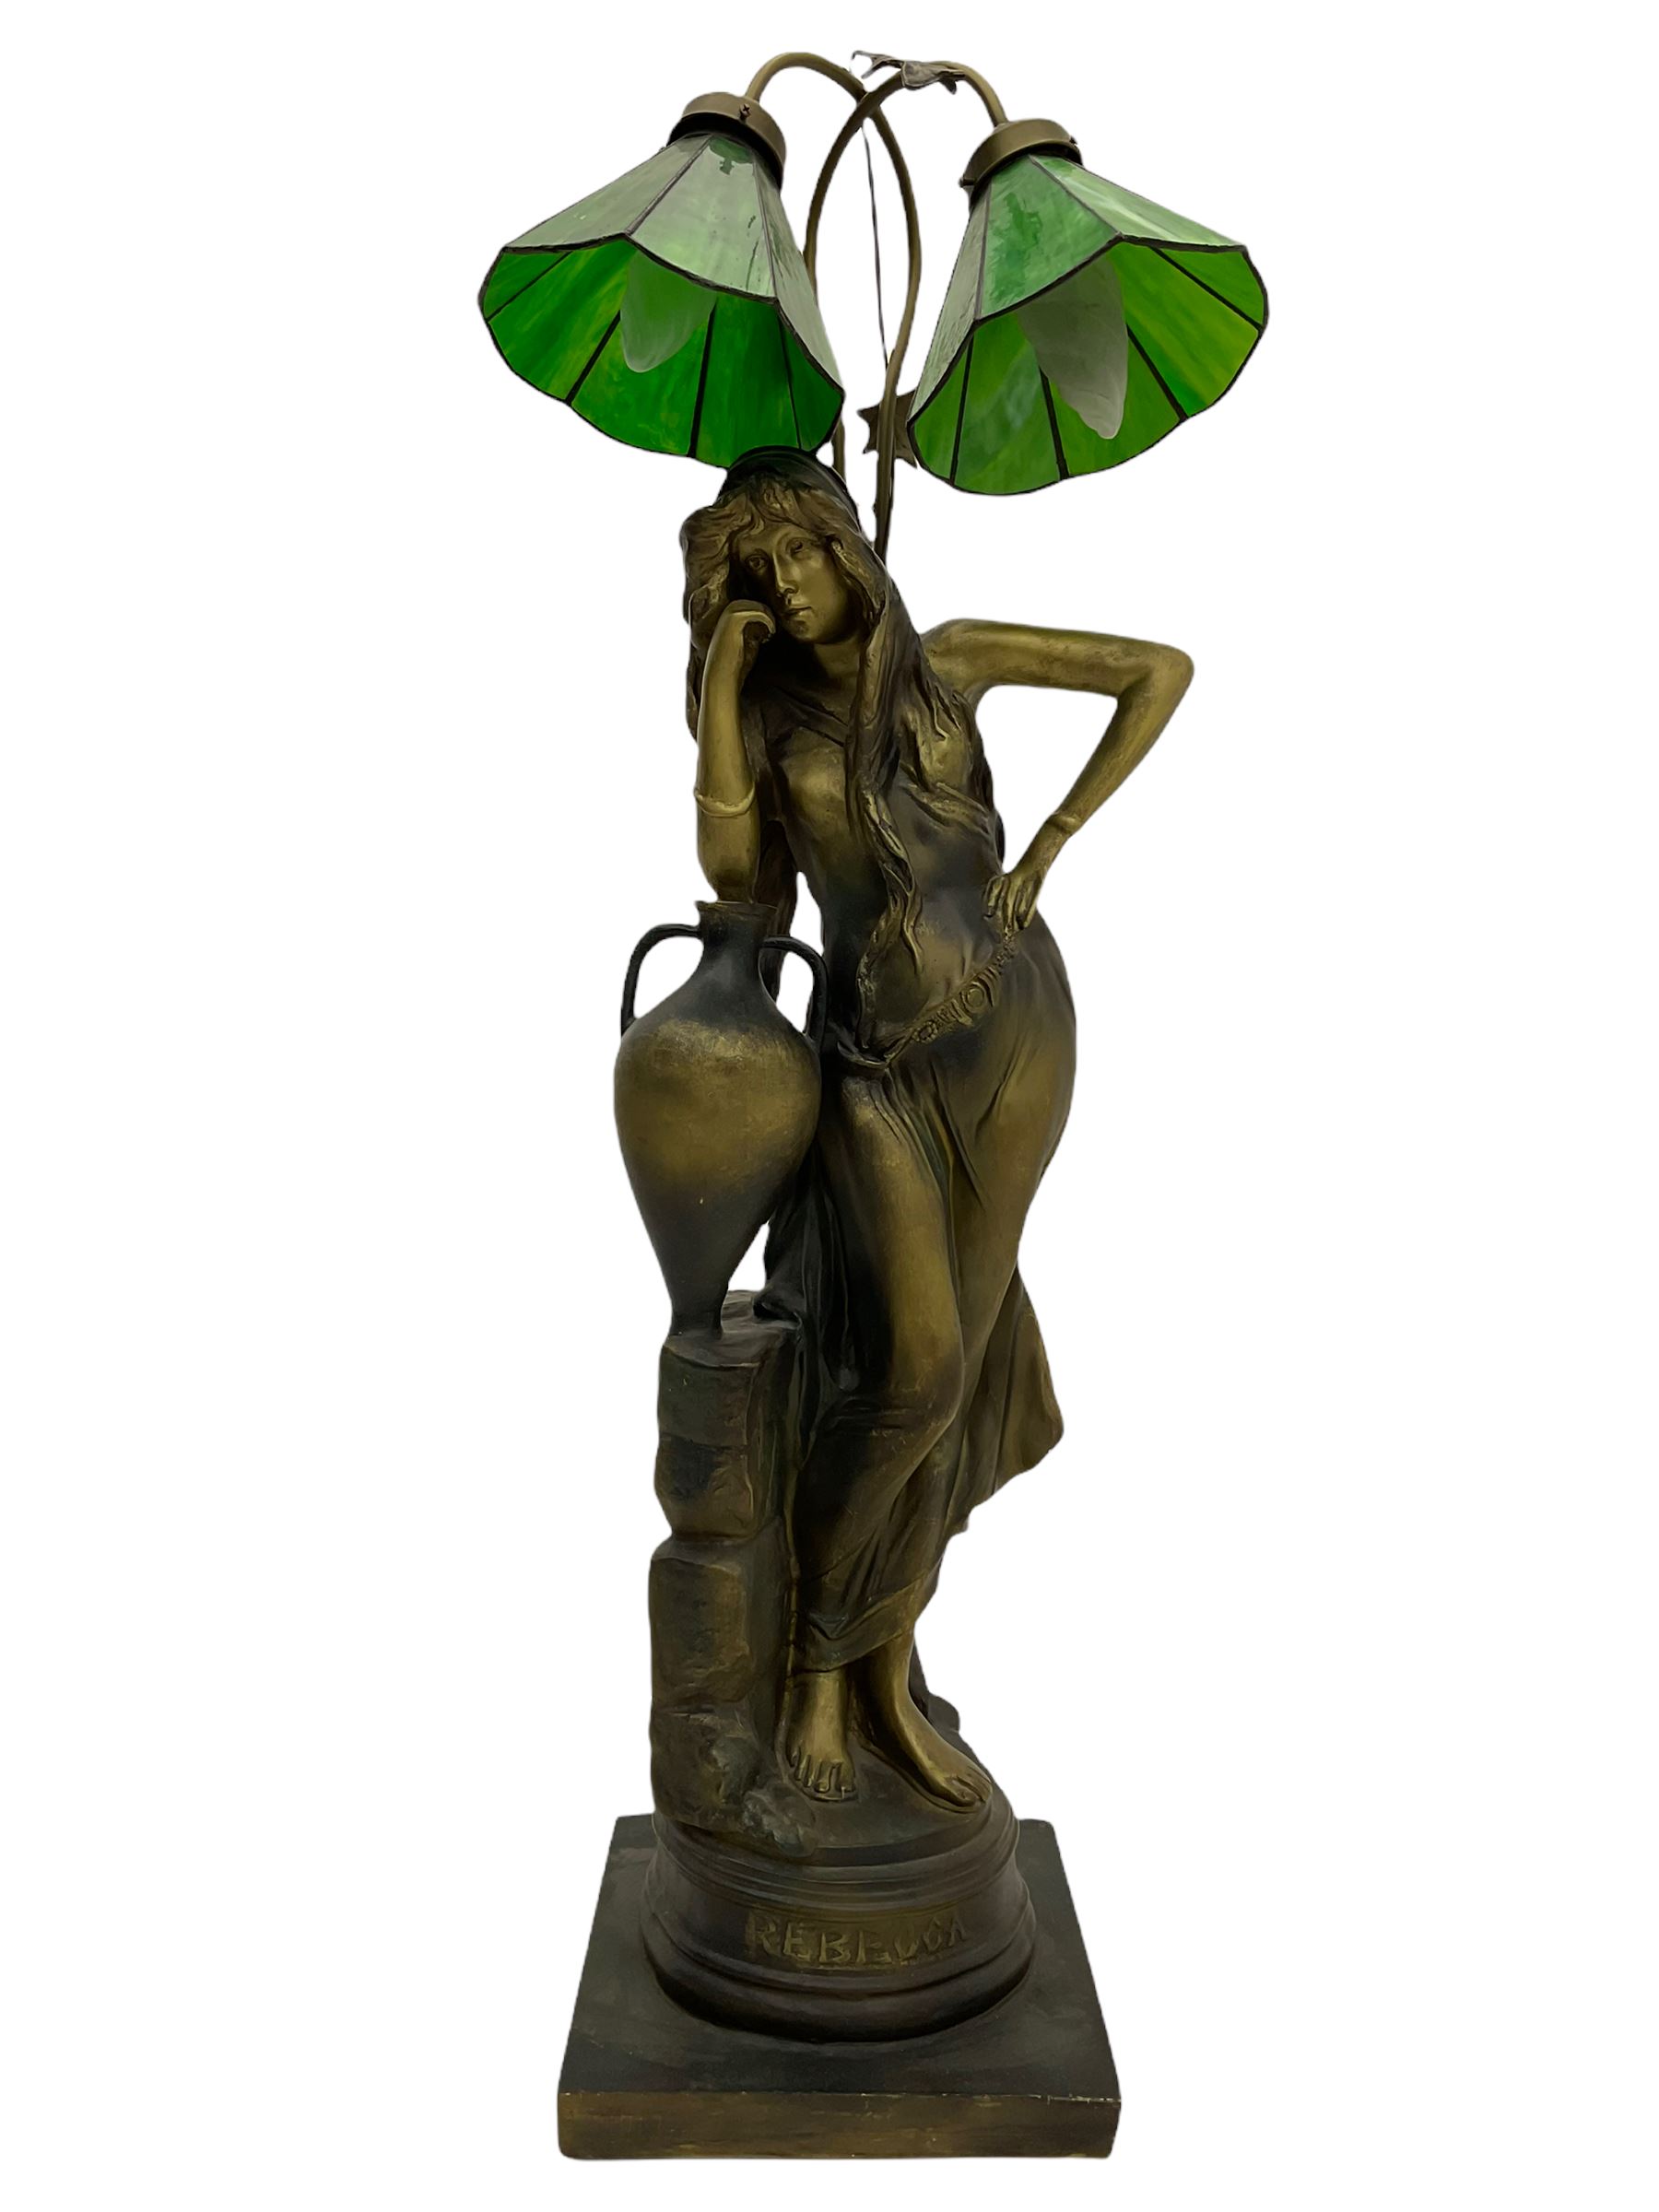 Large Italian style figural lamp depicting Rebecca with urn